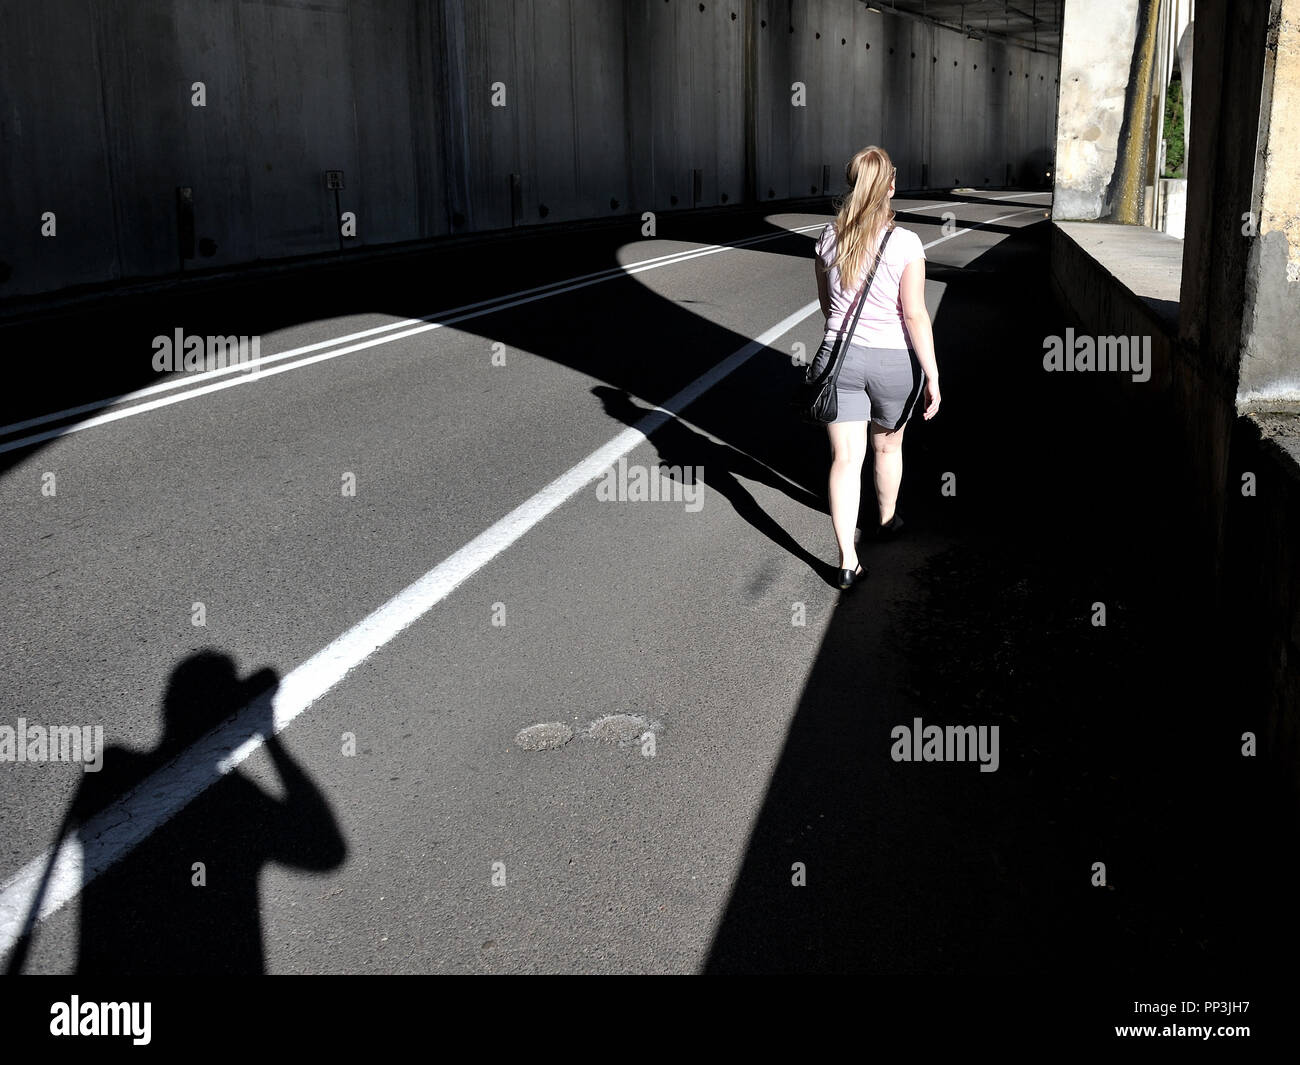 The shadow cast by the photographer and the perspective of the camera give the impression that the young woman is being followed by the photographer. Stock Photo